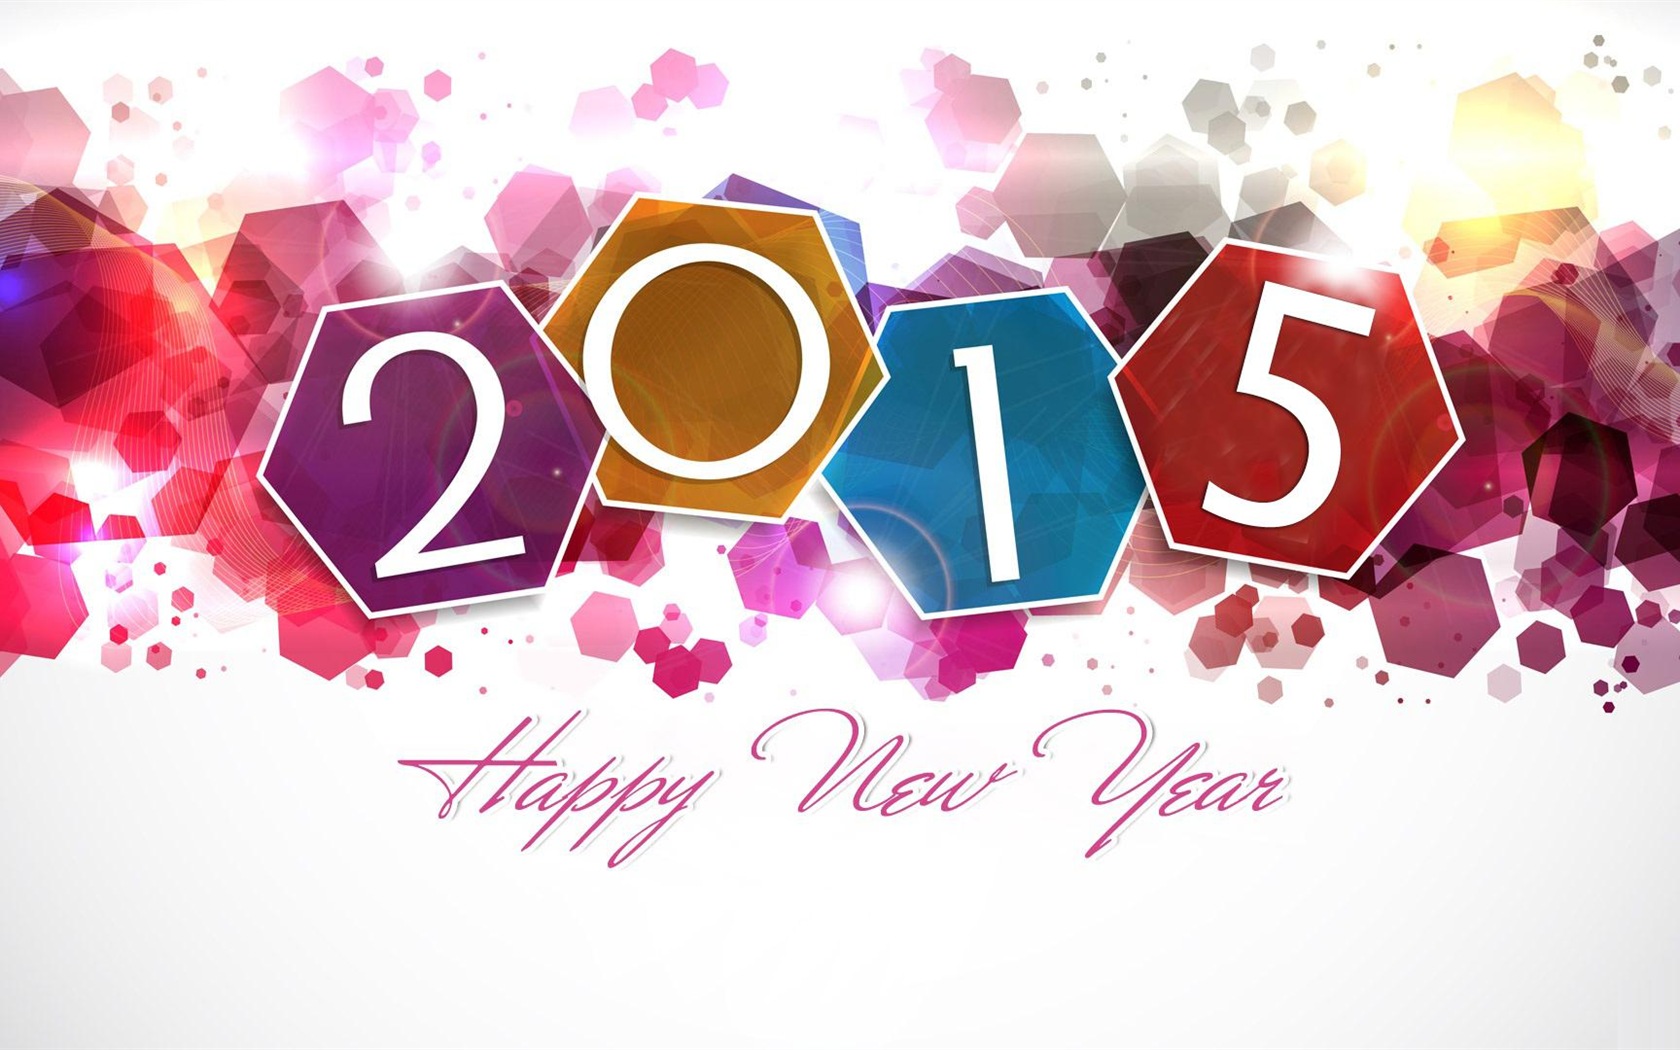 2015 New Year theme HD wallpapers (2) #17 - 1680x1050